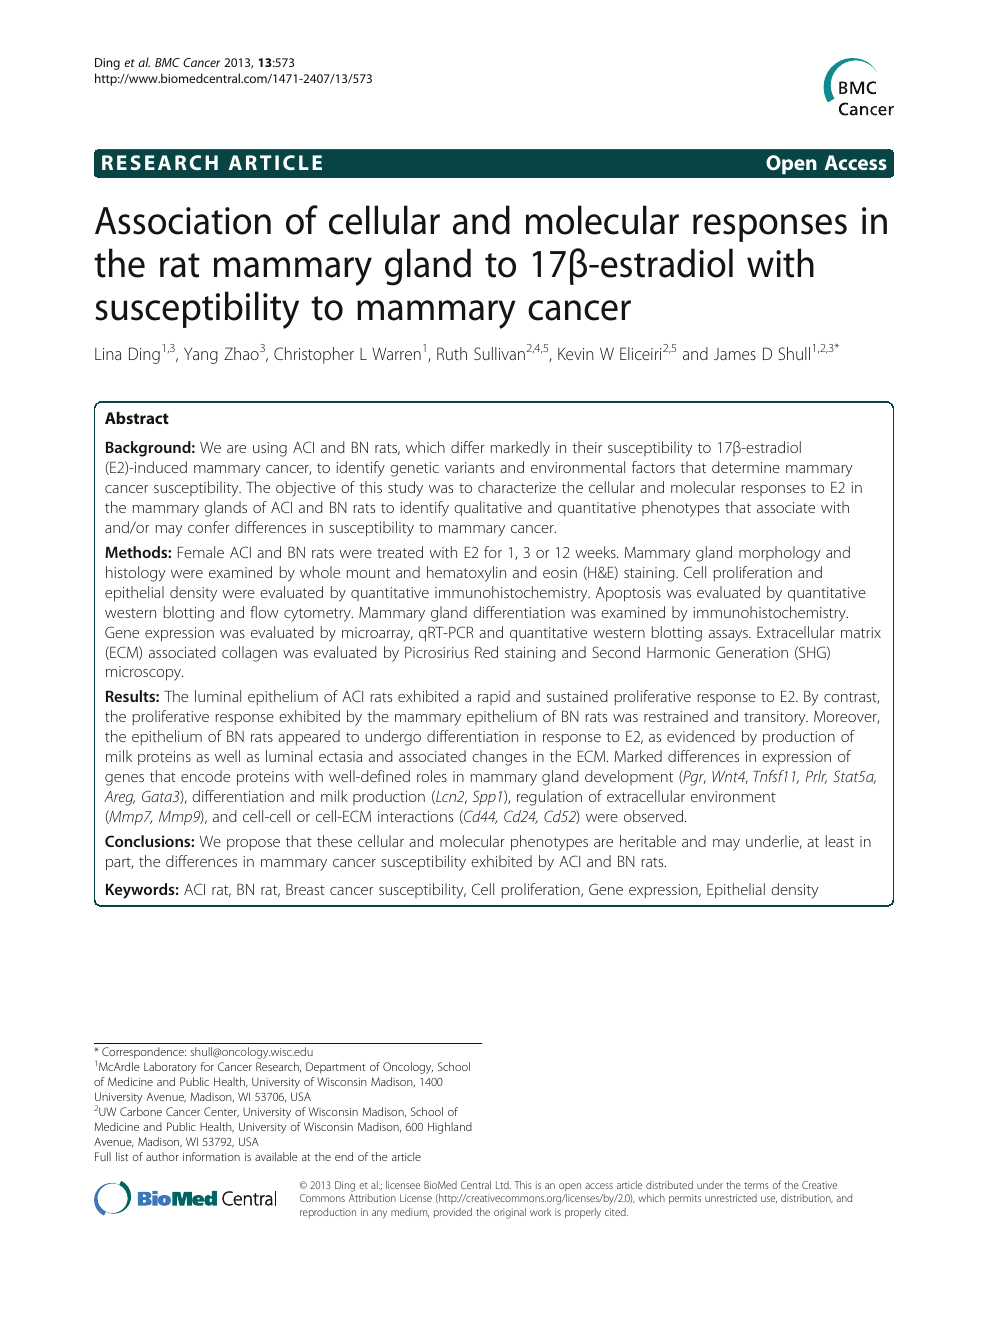 Association Of Cellular And Molecular Responses In The Rat